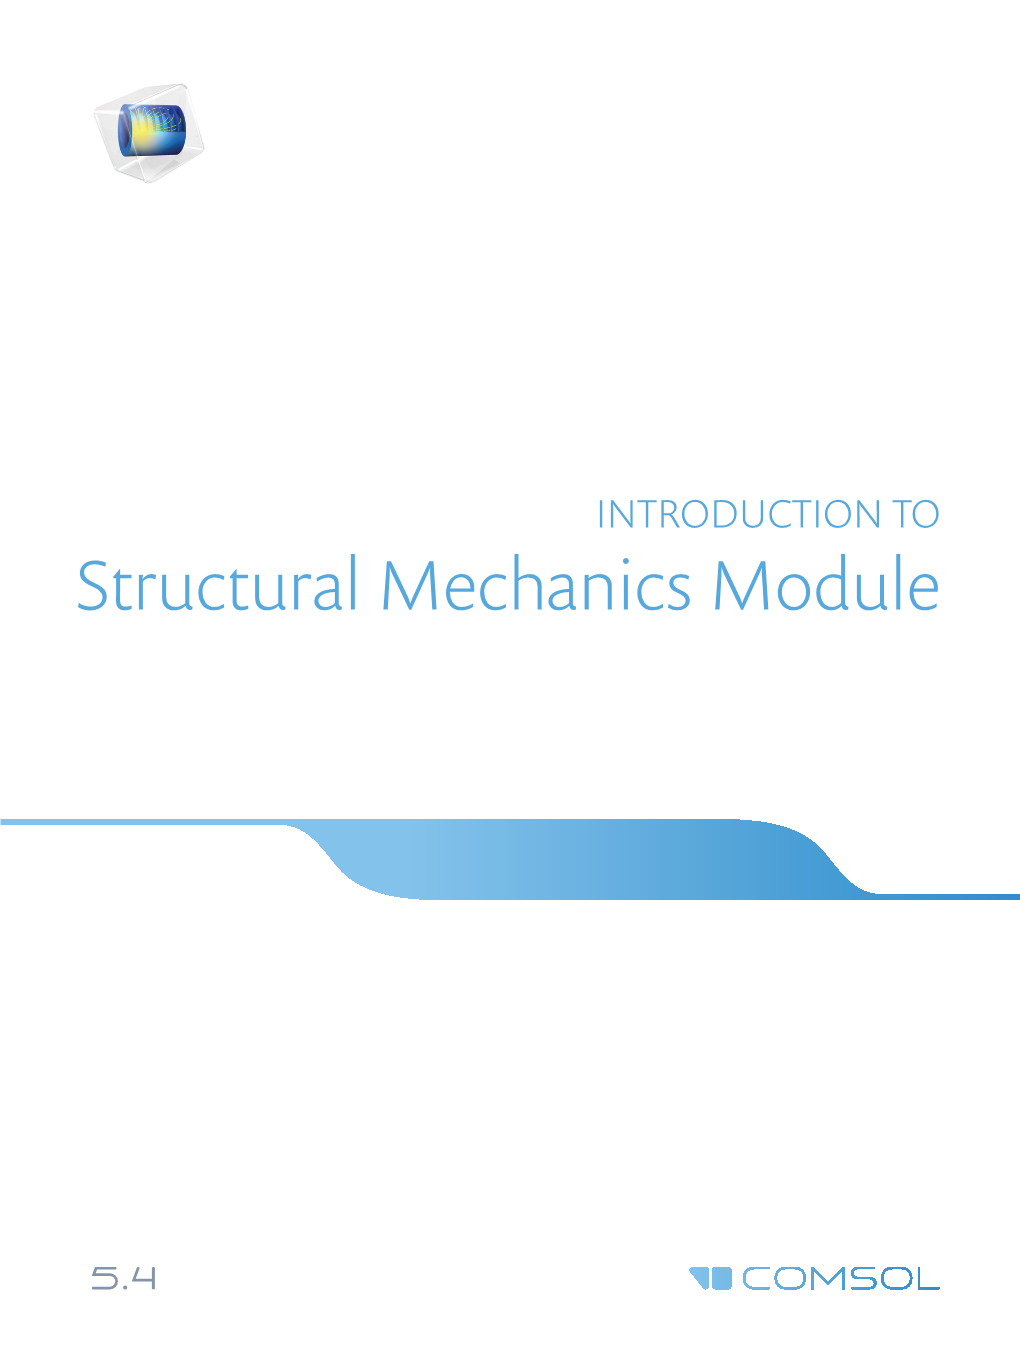 Introduction to the Structural Mechanics Module